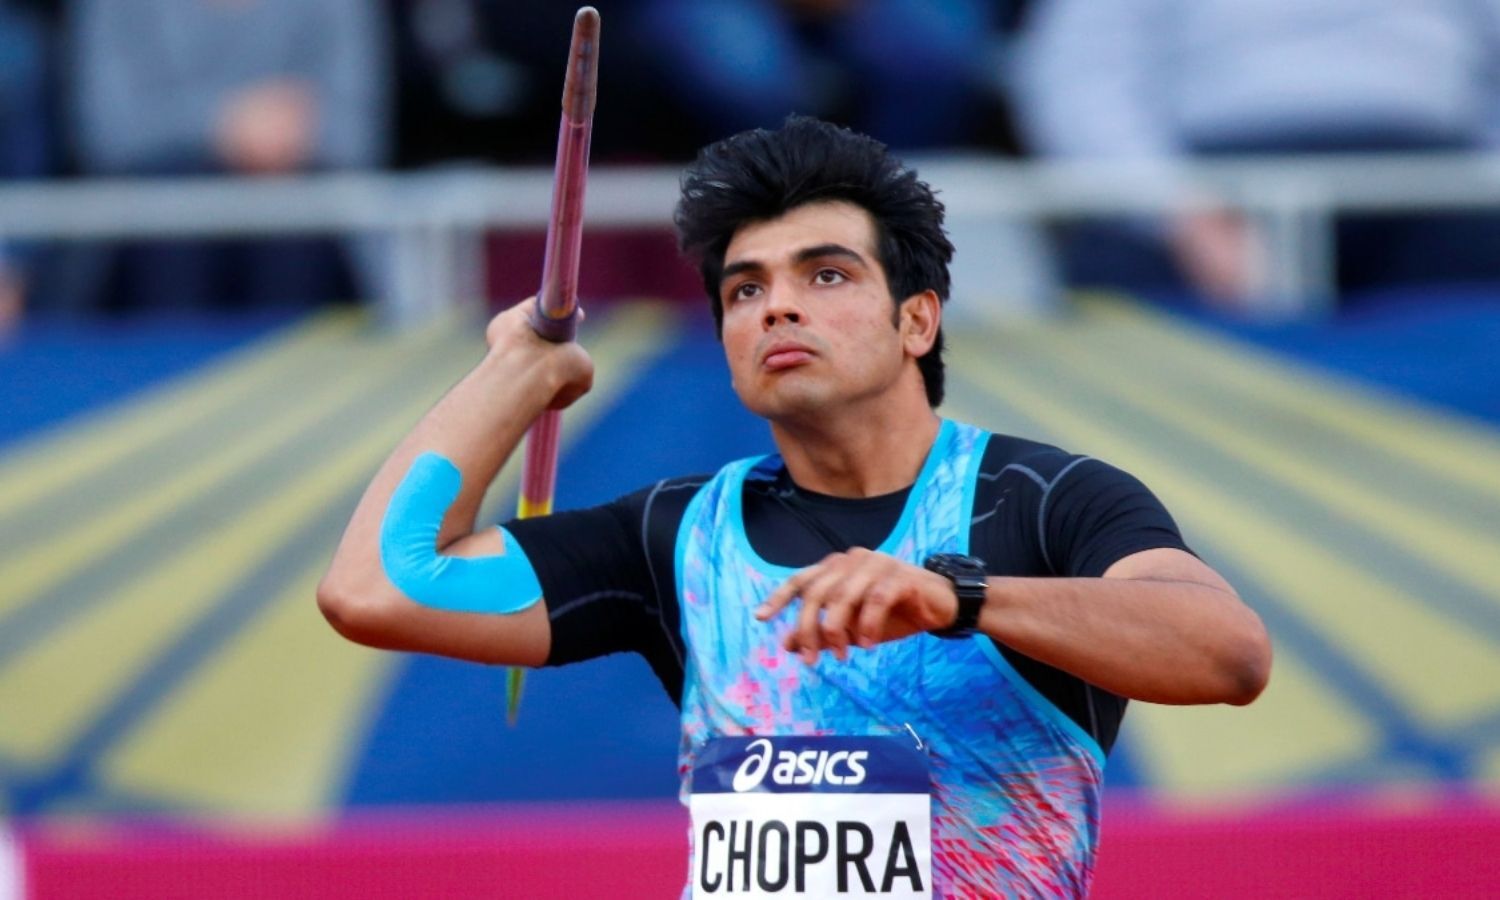 Neeraj Chopra is Indias last best hope to secure an athletics medal at the Olympics